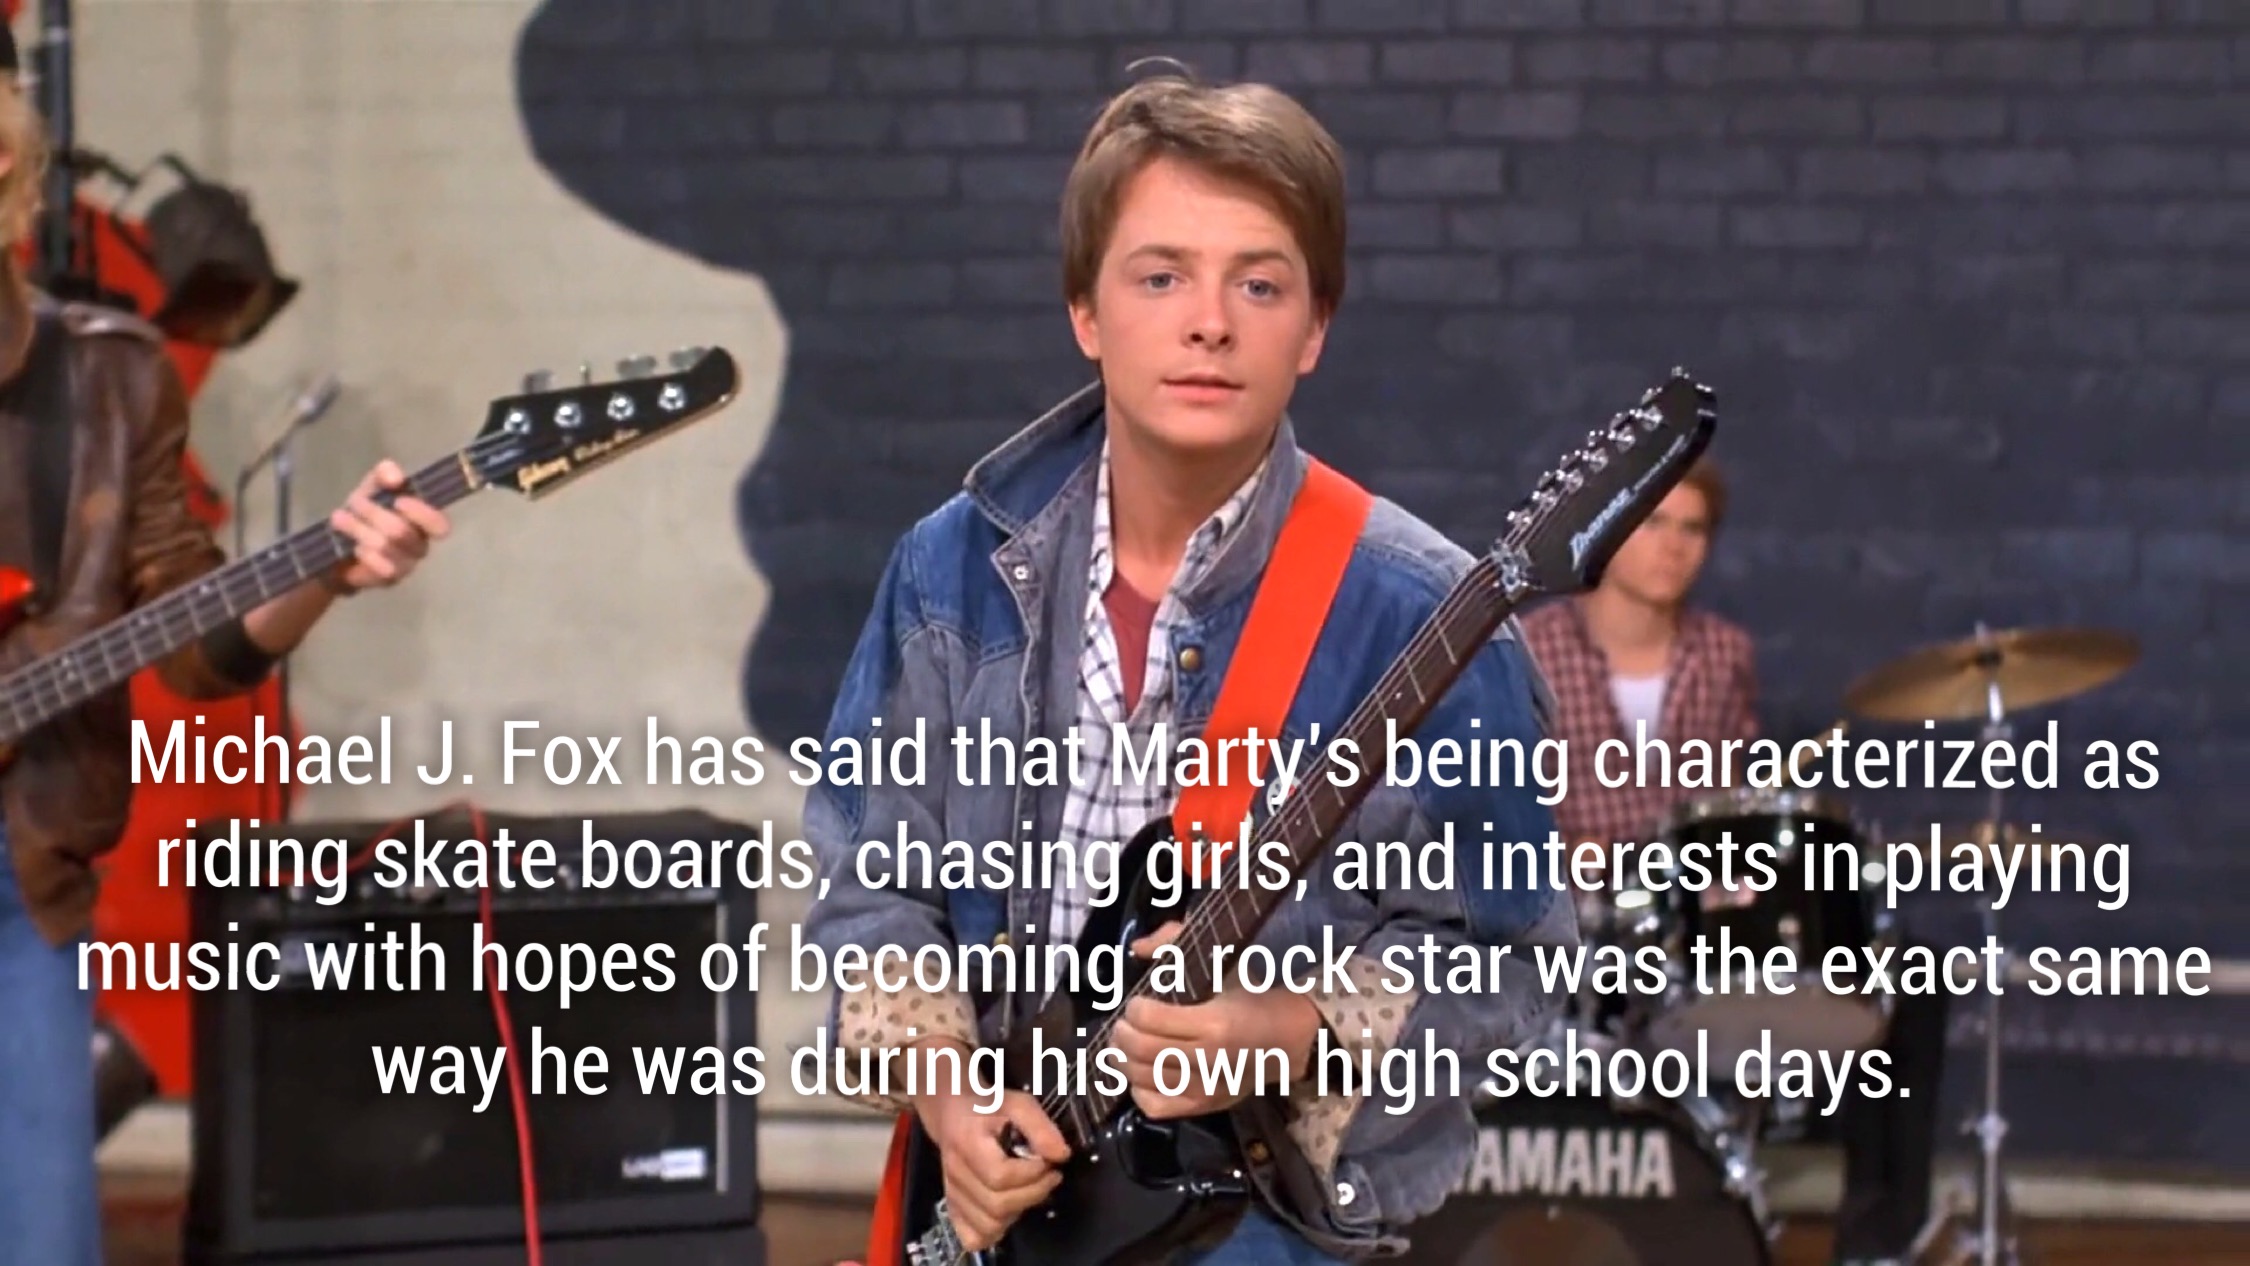 guitar - Michael J. Fox has said that Marty's being characterized as riding skate boards, chasing girls, and interests in playing music with hopes of becoming a rock star was the exact same way he was during his own high school days. Amaha